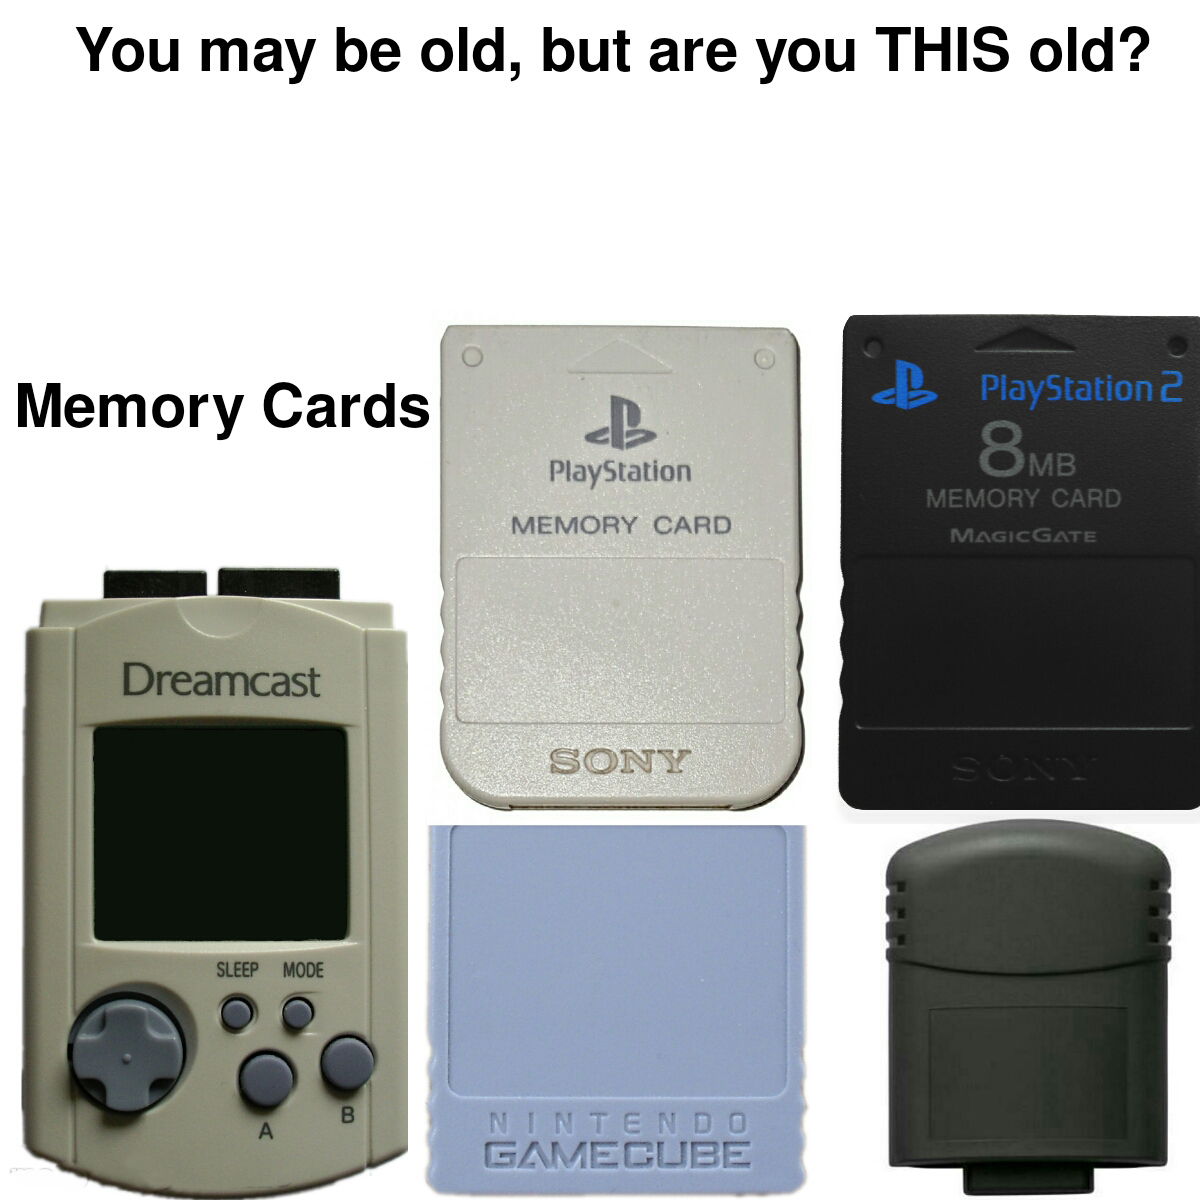 funny memes - dank memes - dreamcast memory card - You may be old, but are you This old? Memory Cards B PlayStation 2 8MB PlayStation Memory Card Dreamcast Sony Sleep Mode Nintendo Gamecube 8 Memory Card Magicglate